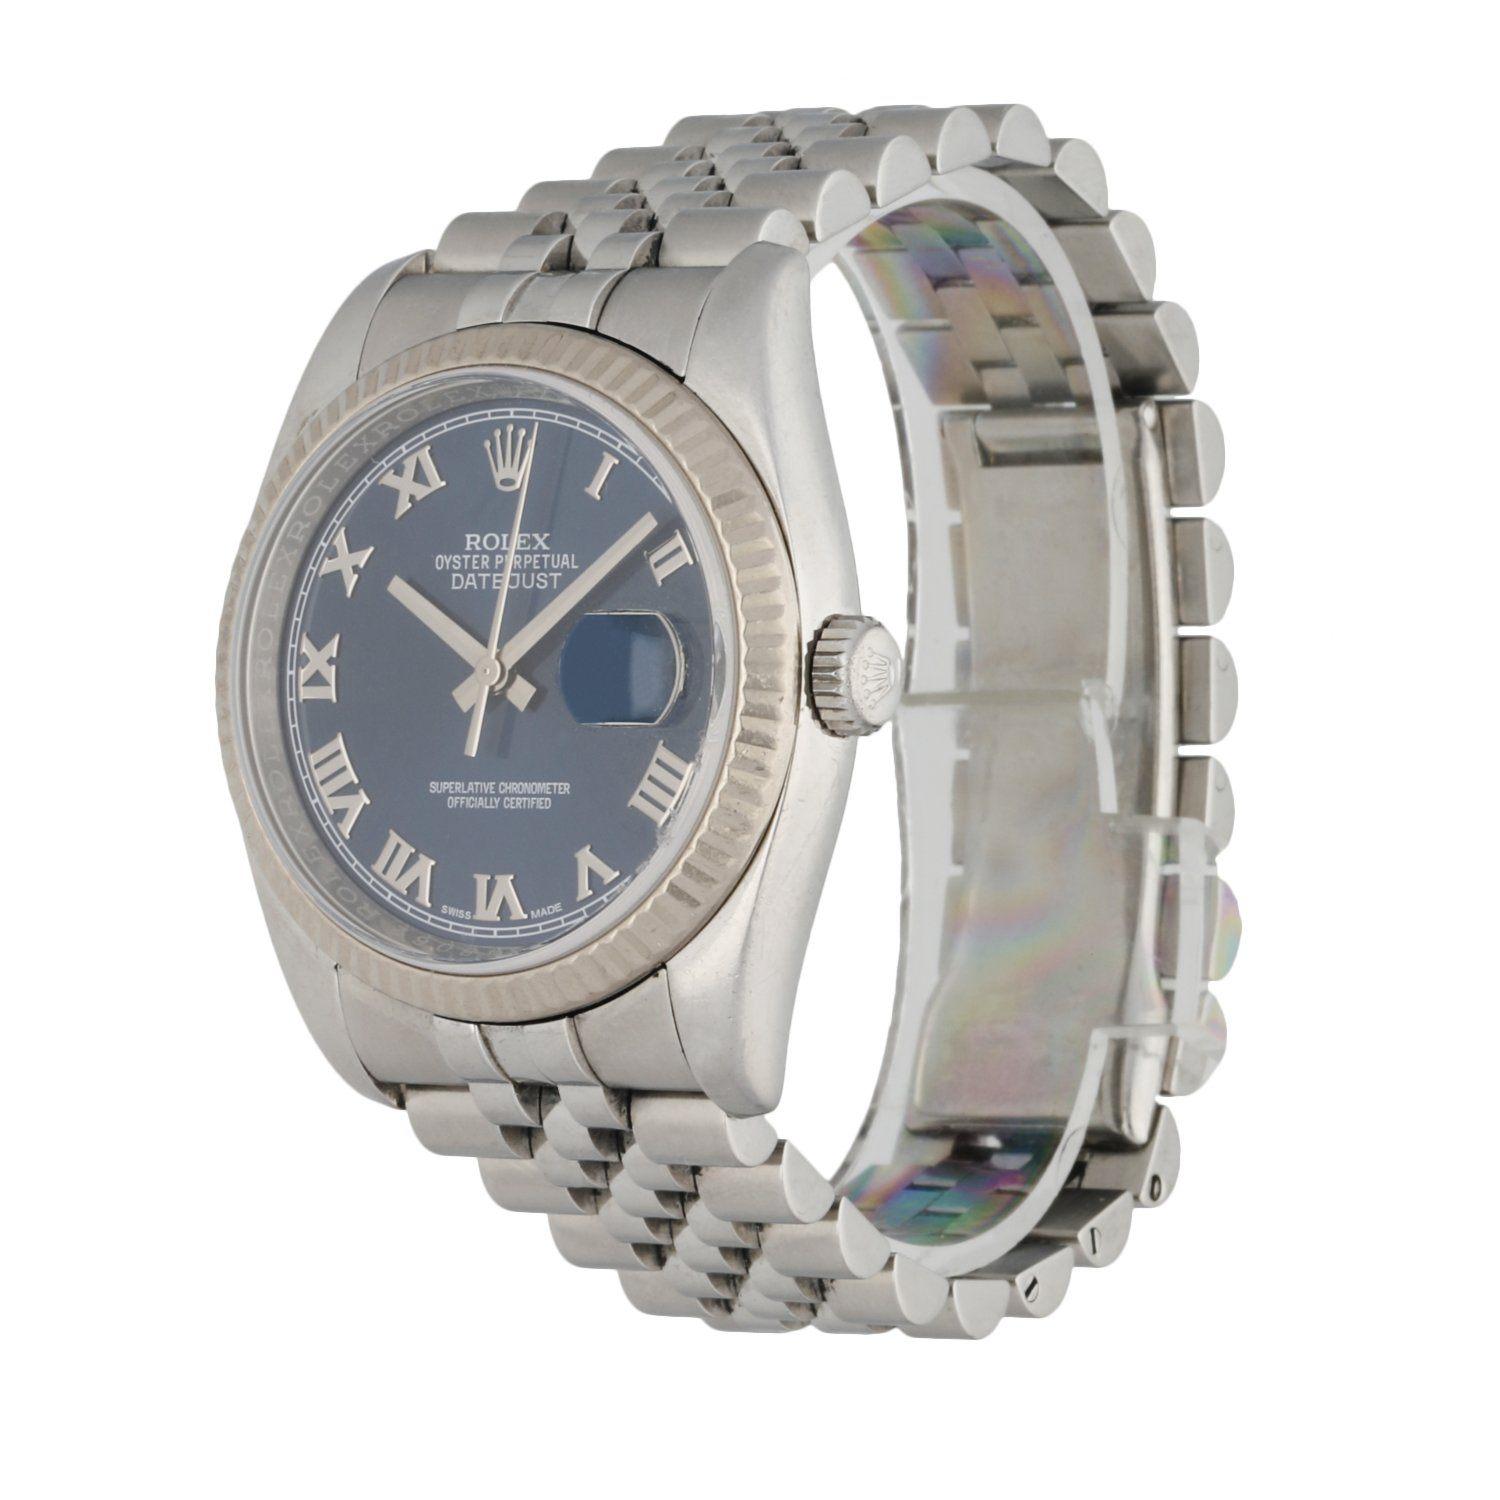 Rolex Oyster Perpetual Datejust 116234 men's watch. 36mm stainless steel case. 18K white gold fluted bezel. Blue dial with steel hands and steel Roman numeral hour markers. Minute marker around the outer dial. Quickset date display at 3 o'clock